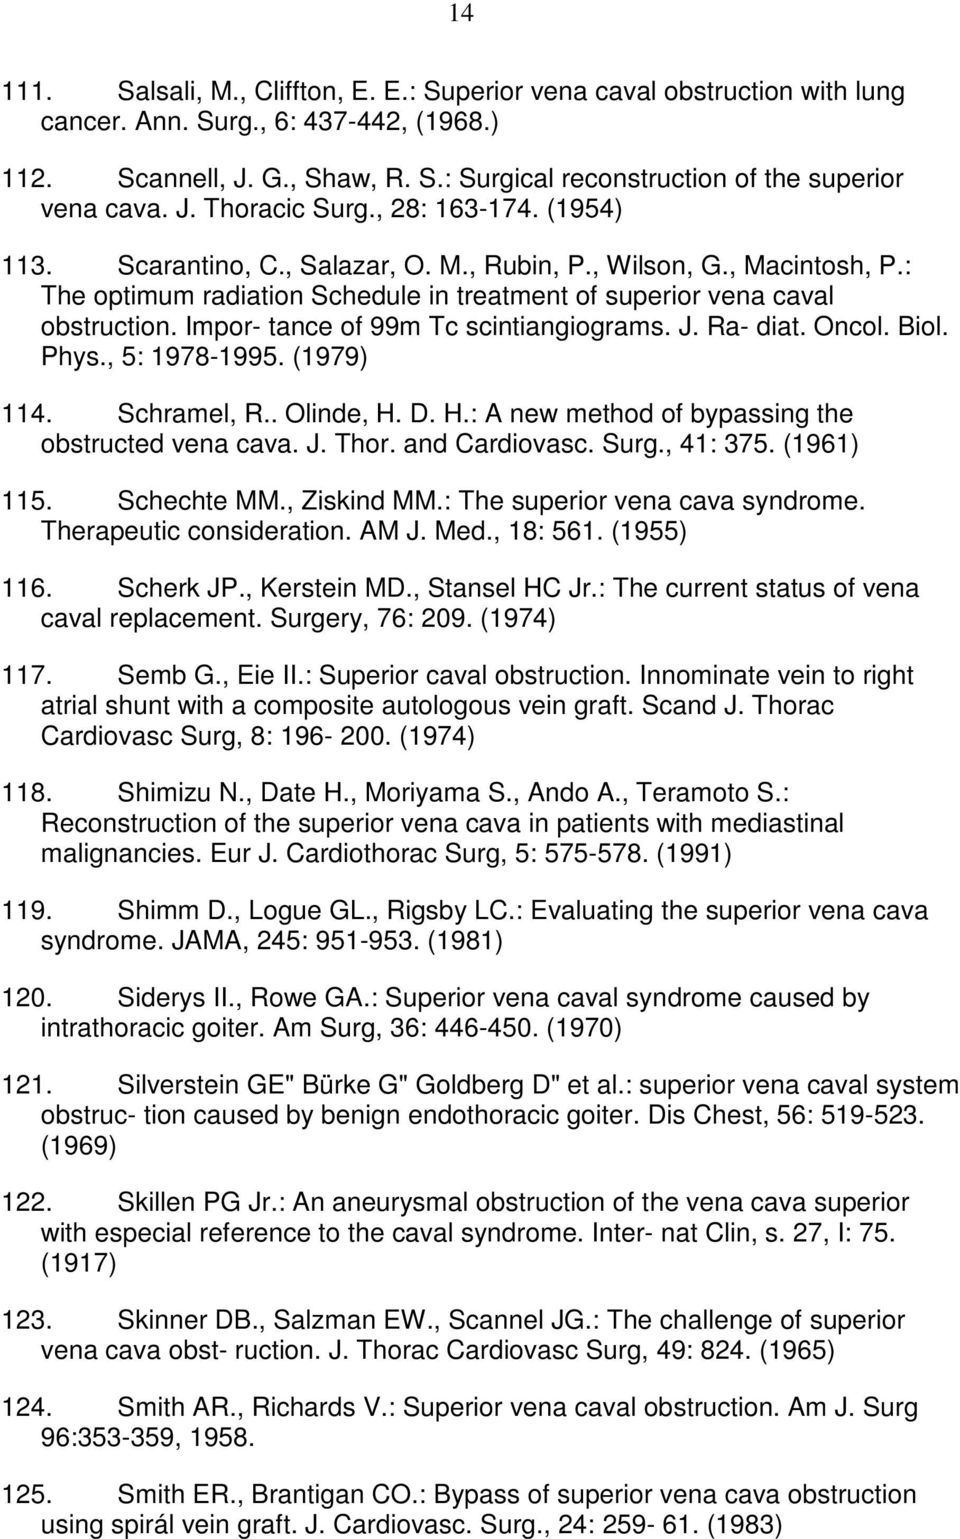 Impor- tance of 99m Tc scintiangiograms. J. Ra- diat. Oncol. Biol. Phys., 5: 1978-1995. (1979) 114. Schramel, R.. Olinde, H. D. H.: A new method of bypassing the obstructed vena cava. J. Thor.